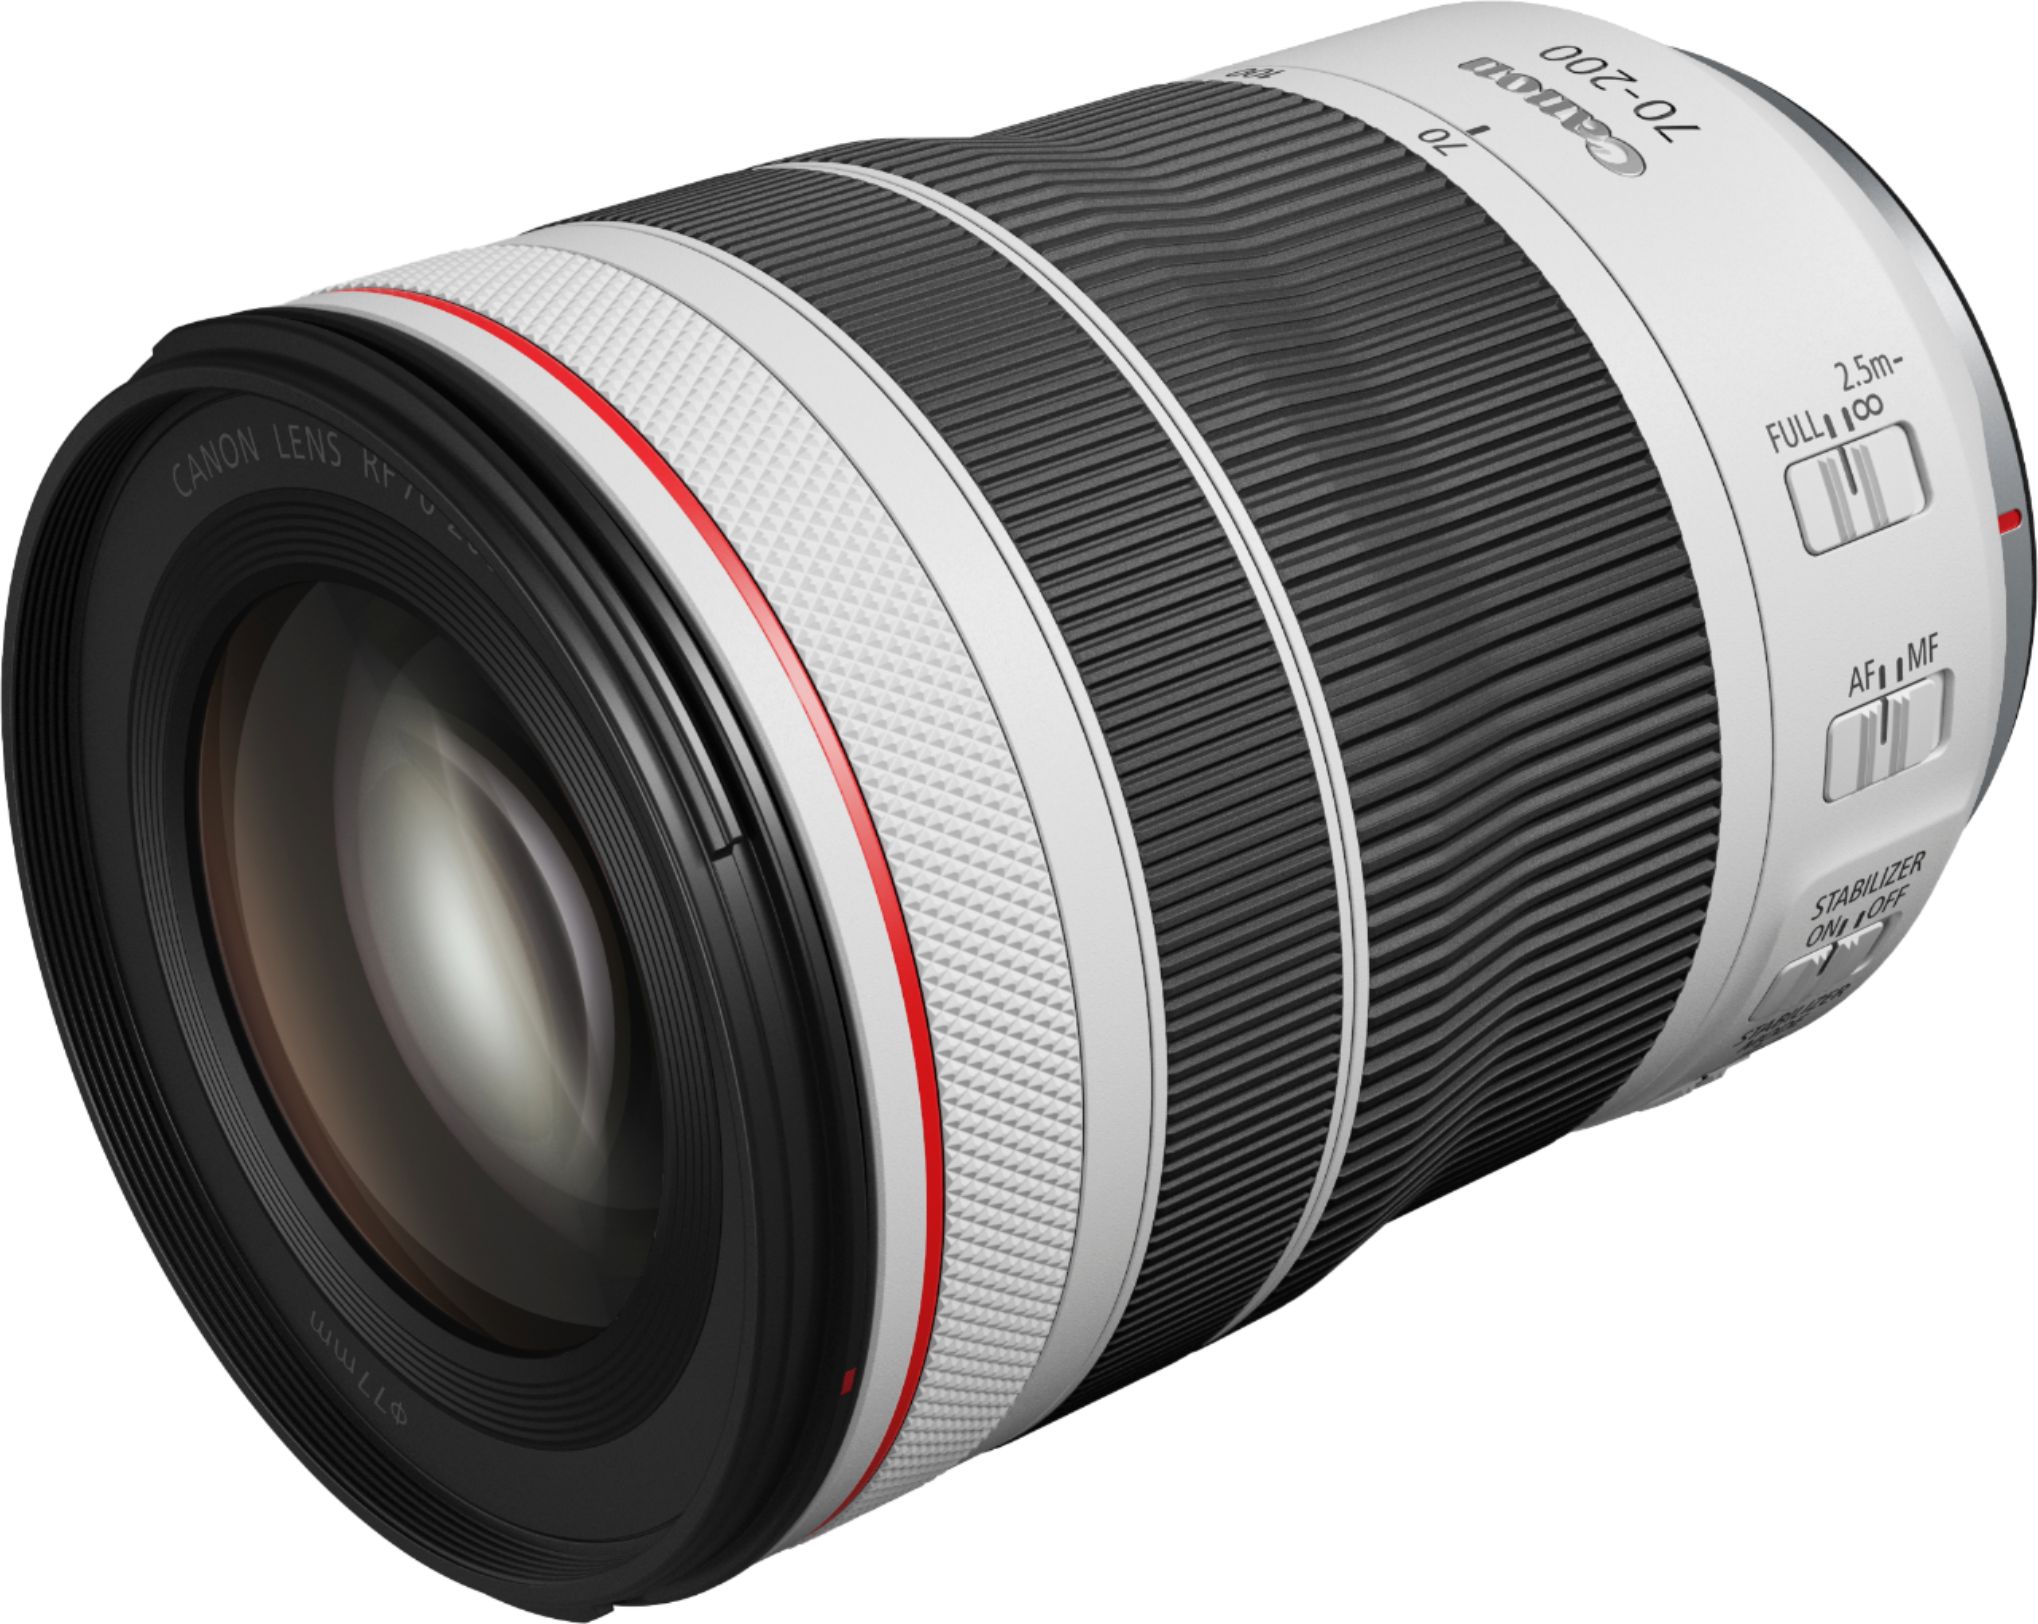 Angle View: Canon - EF70-300 IS II USM Telephoto Zoom Lens for DSLR Cameras - black